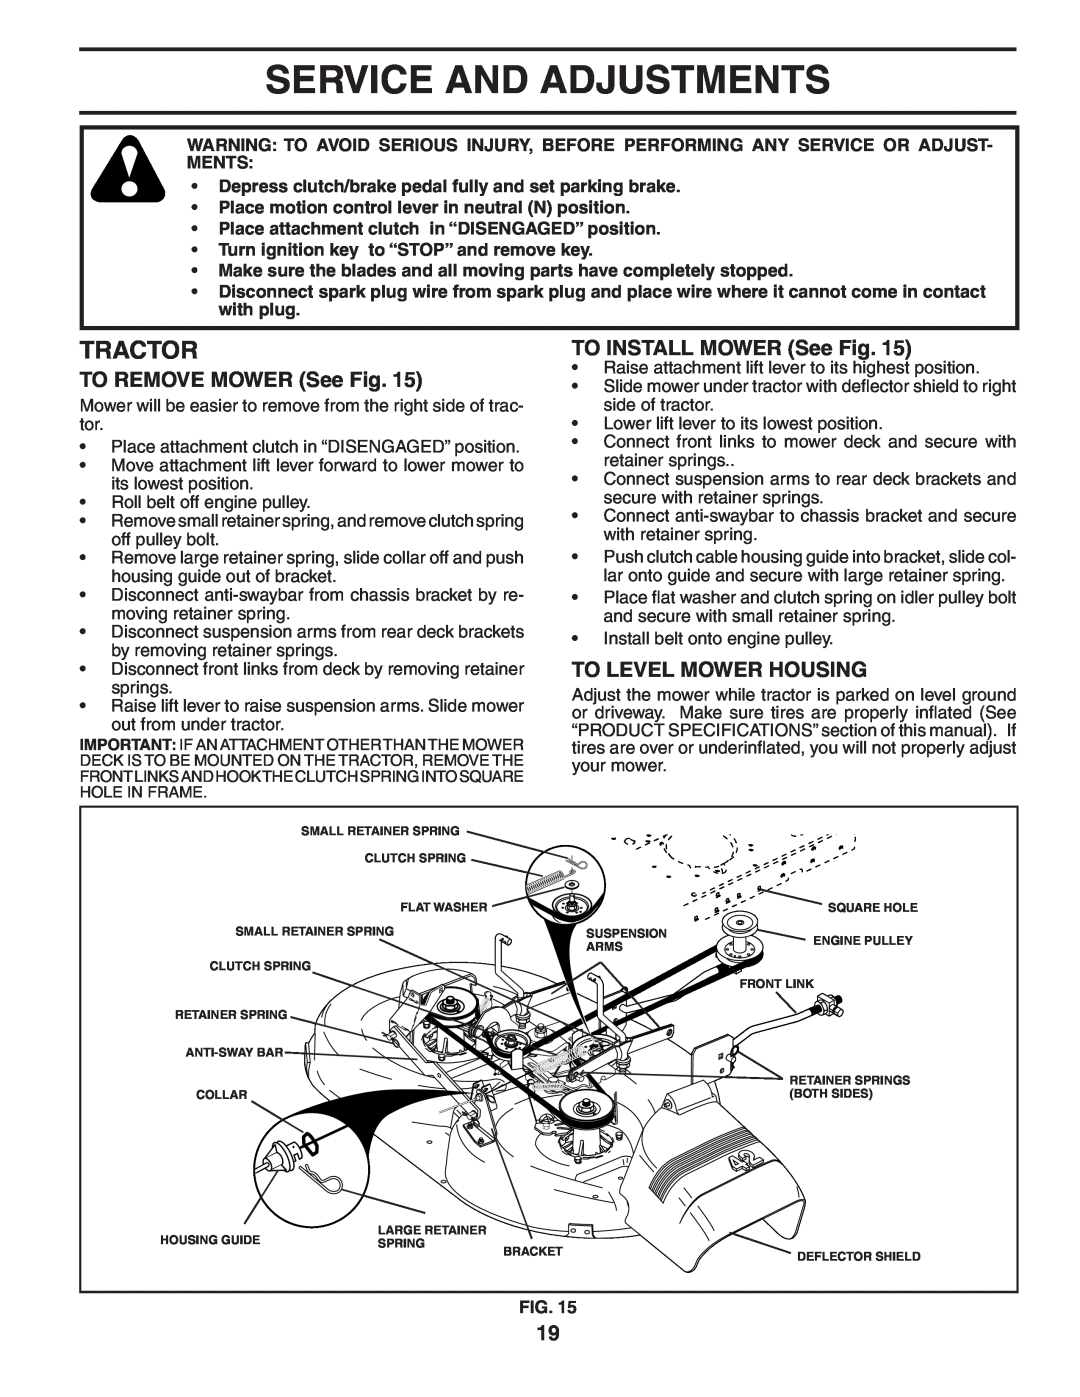 Poulan BB185H42LT manual Service And Adjustments, TO REMOVE MOWER See Fig, TO INSTALL MOWER See Fig, To Level Mower Housing 